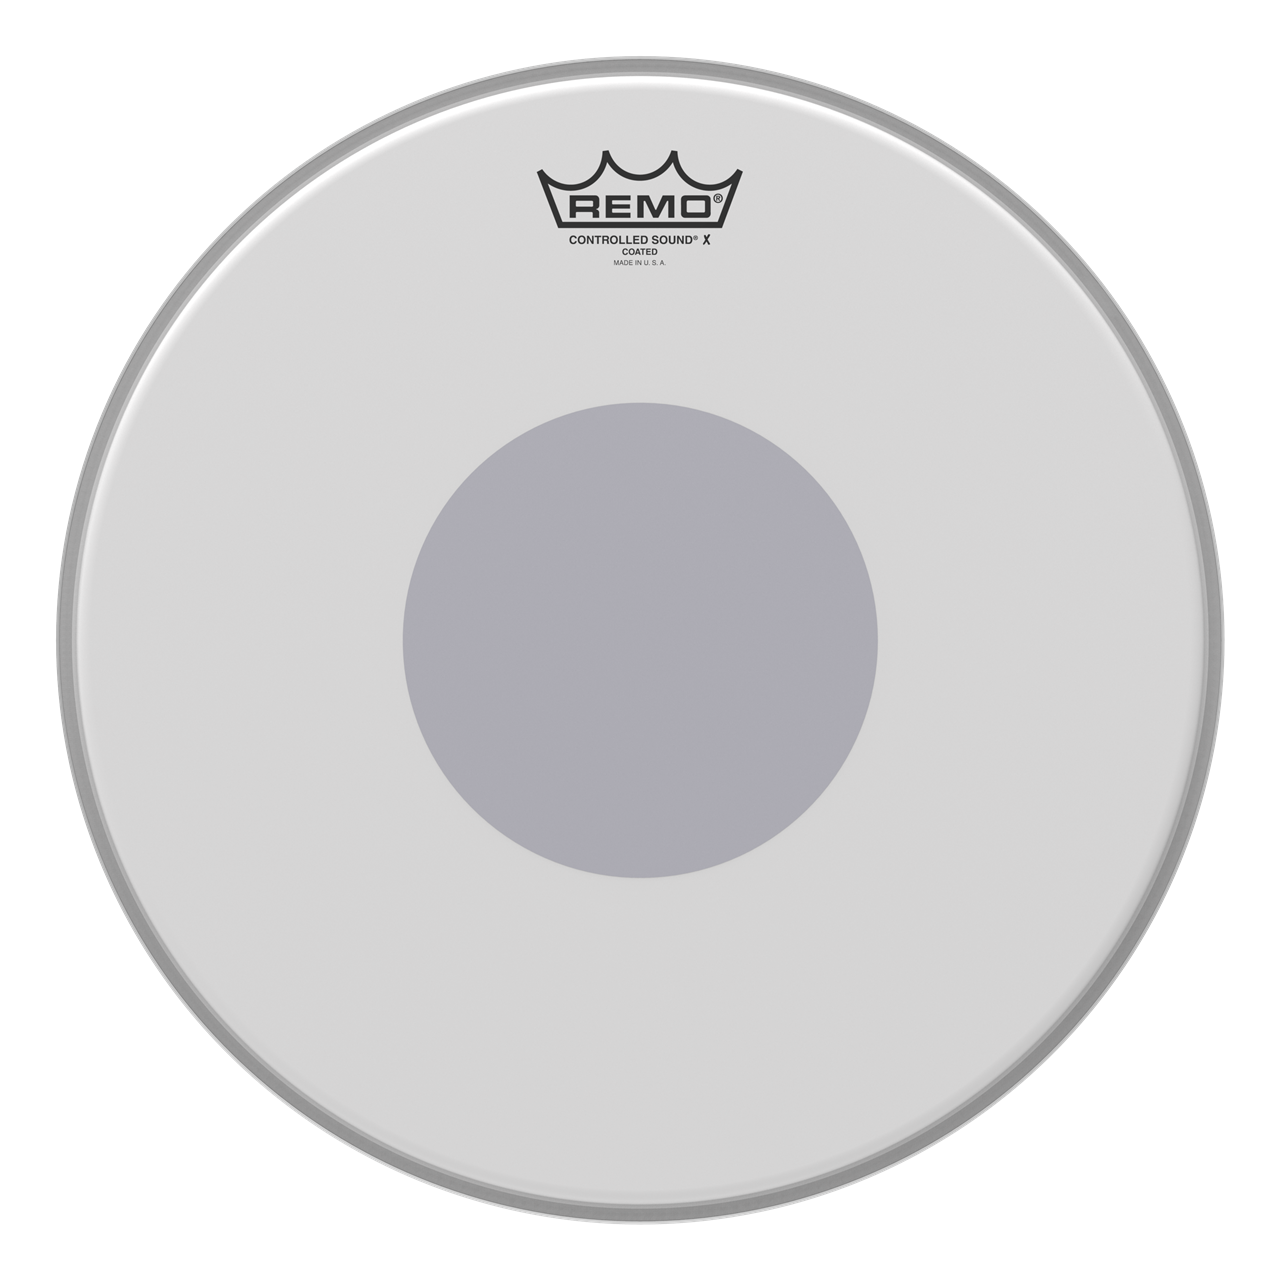 Remo CX-0113-10 Controlled Sound X, 13" Coated, Black Dot